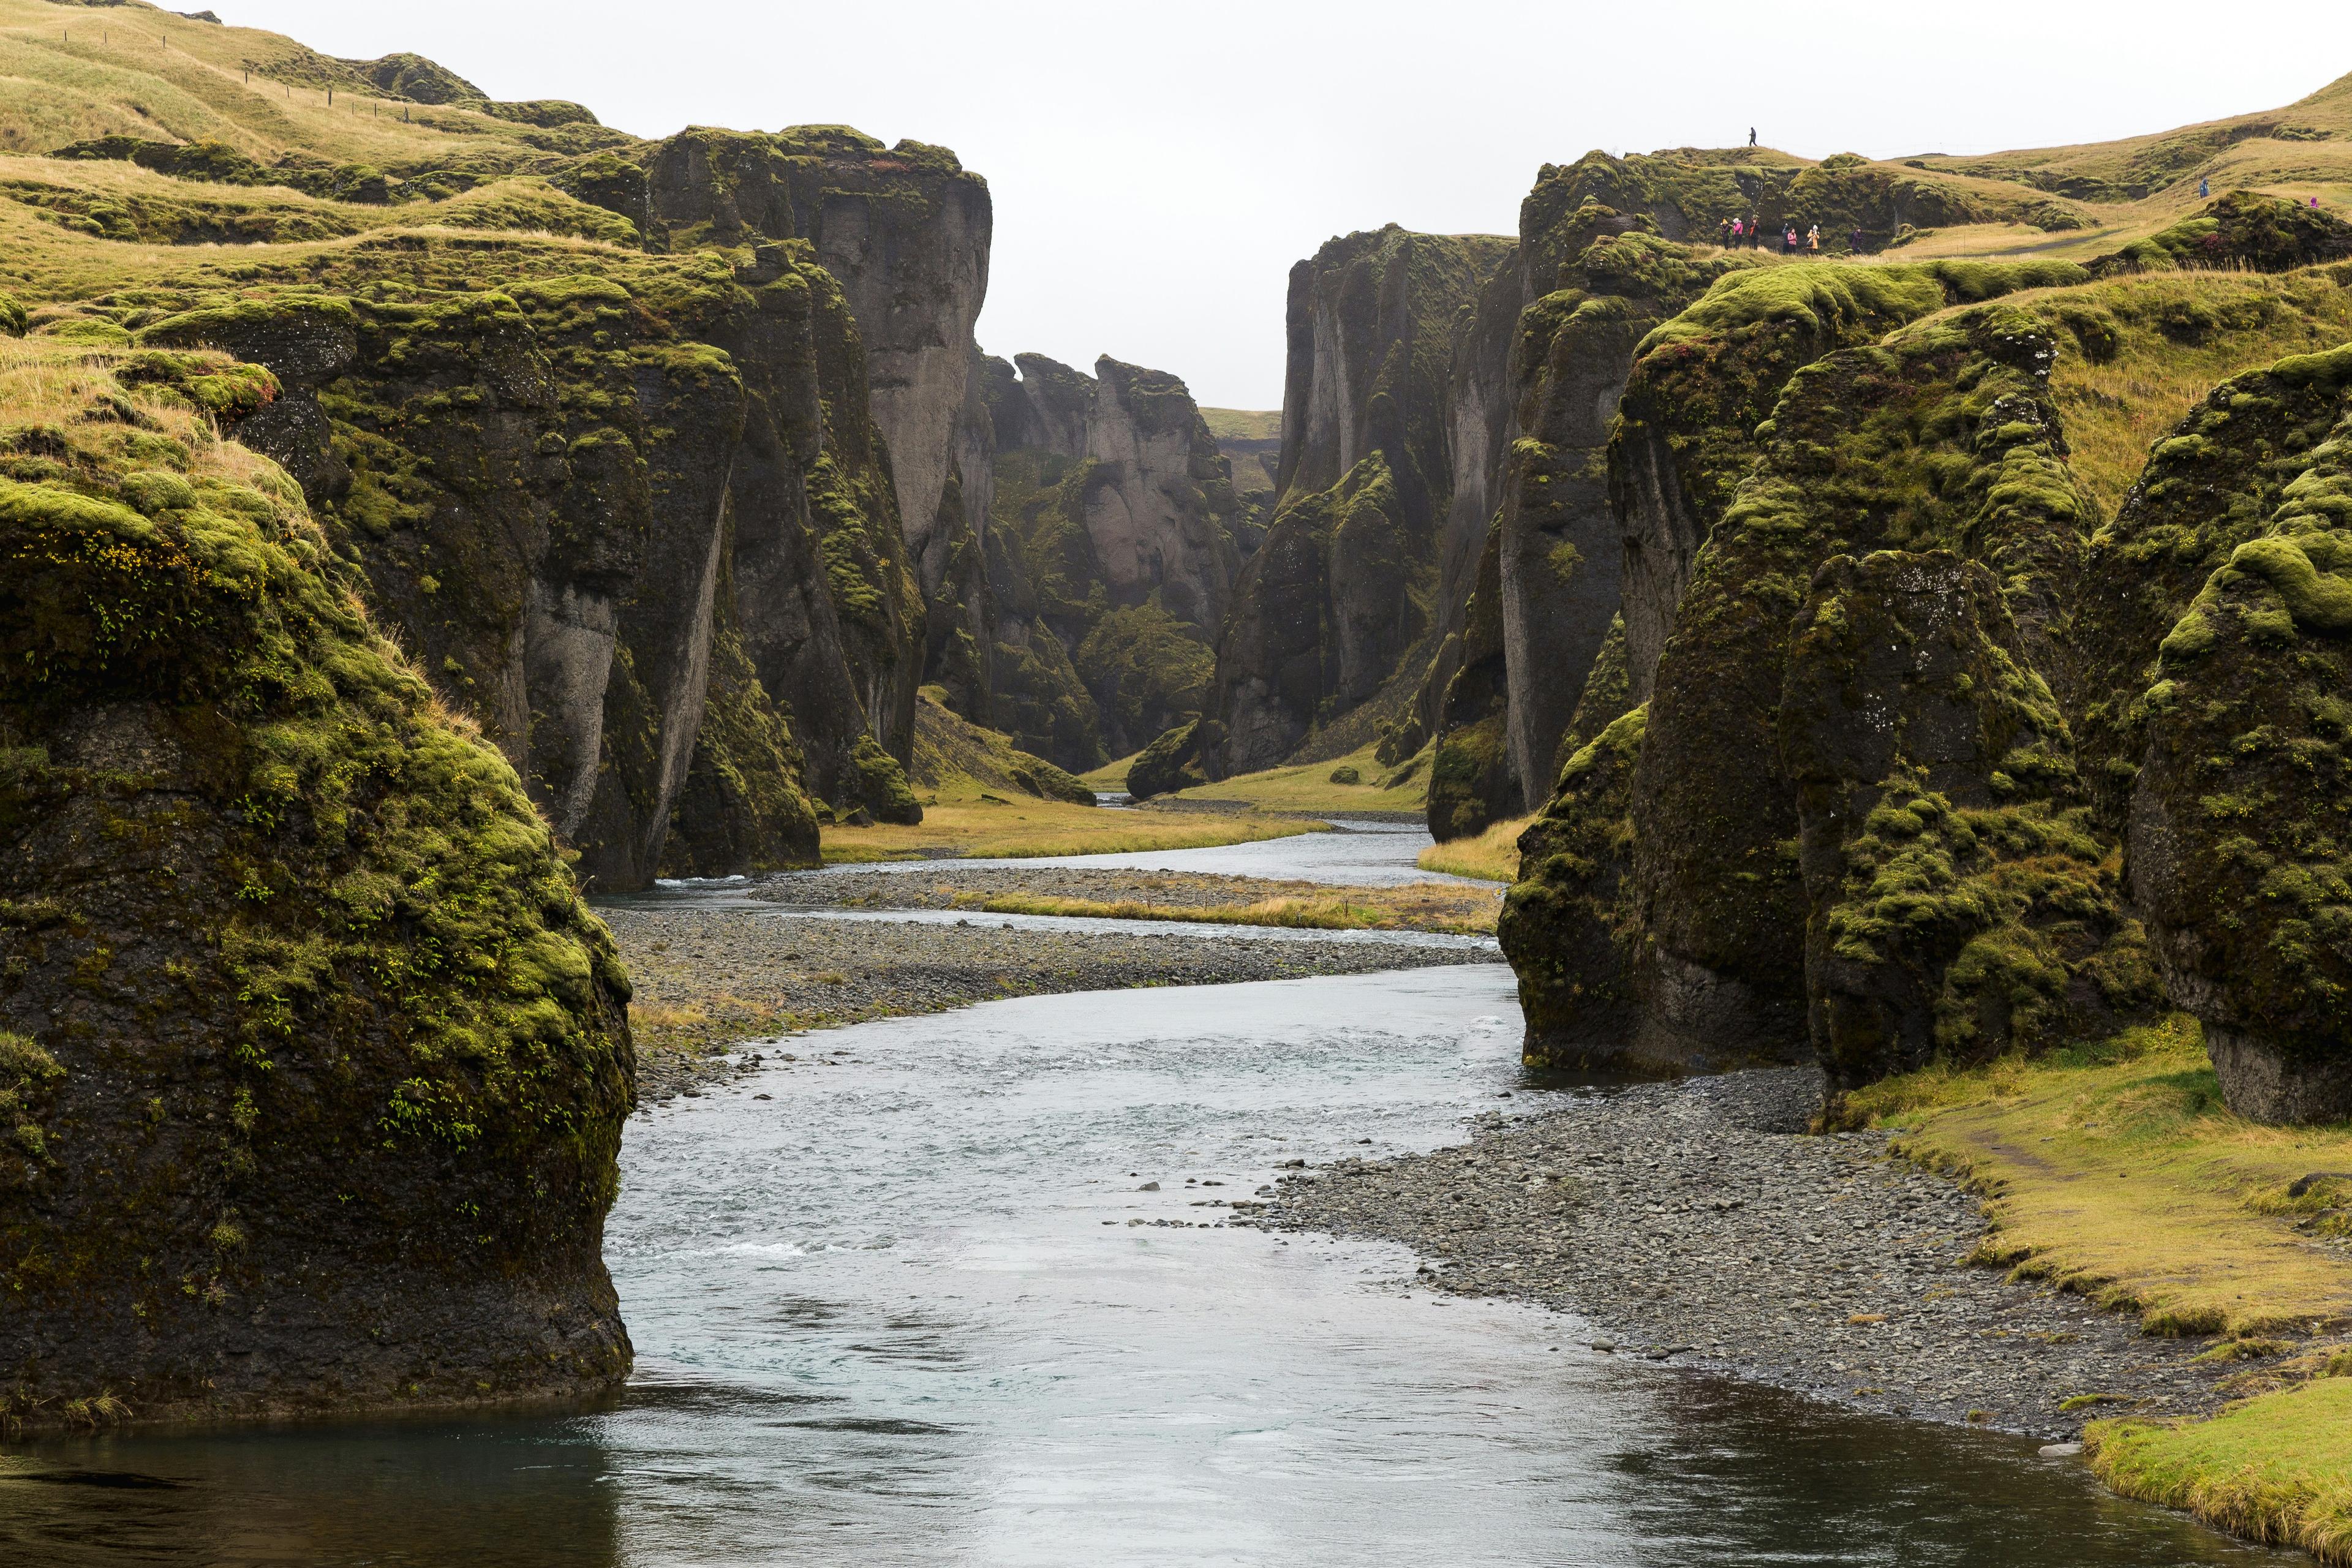 A serene river meandering through a dramatic canyon with steep, moss-covered cliffs under a cloudy sky.